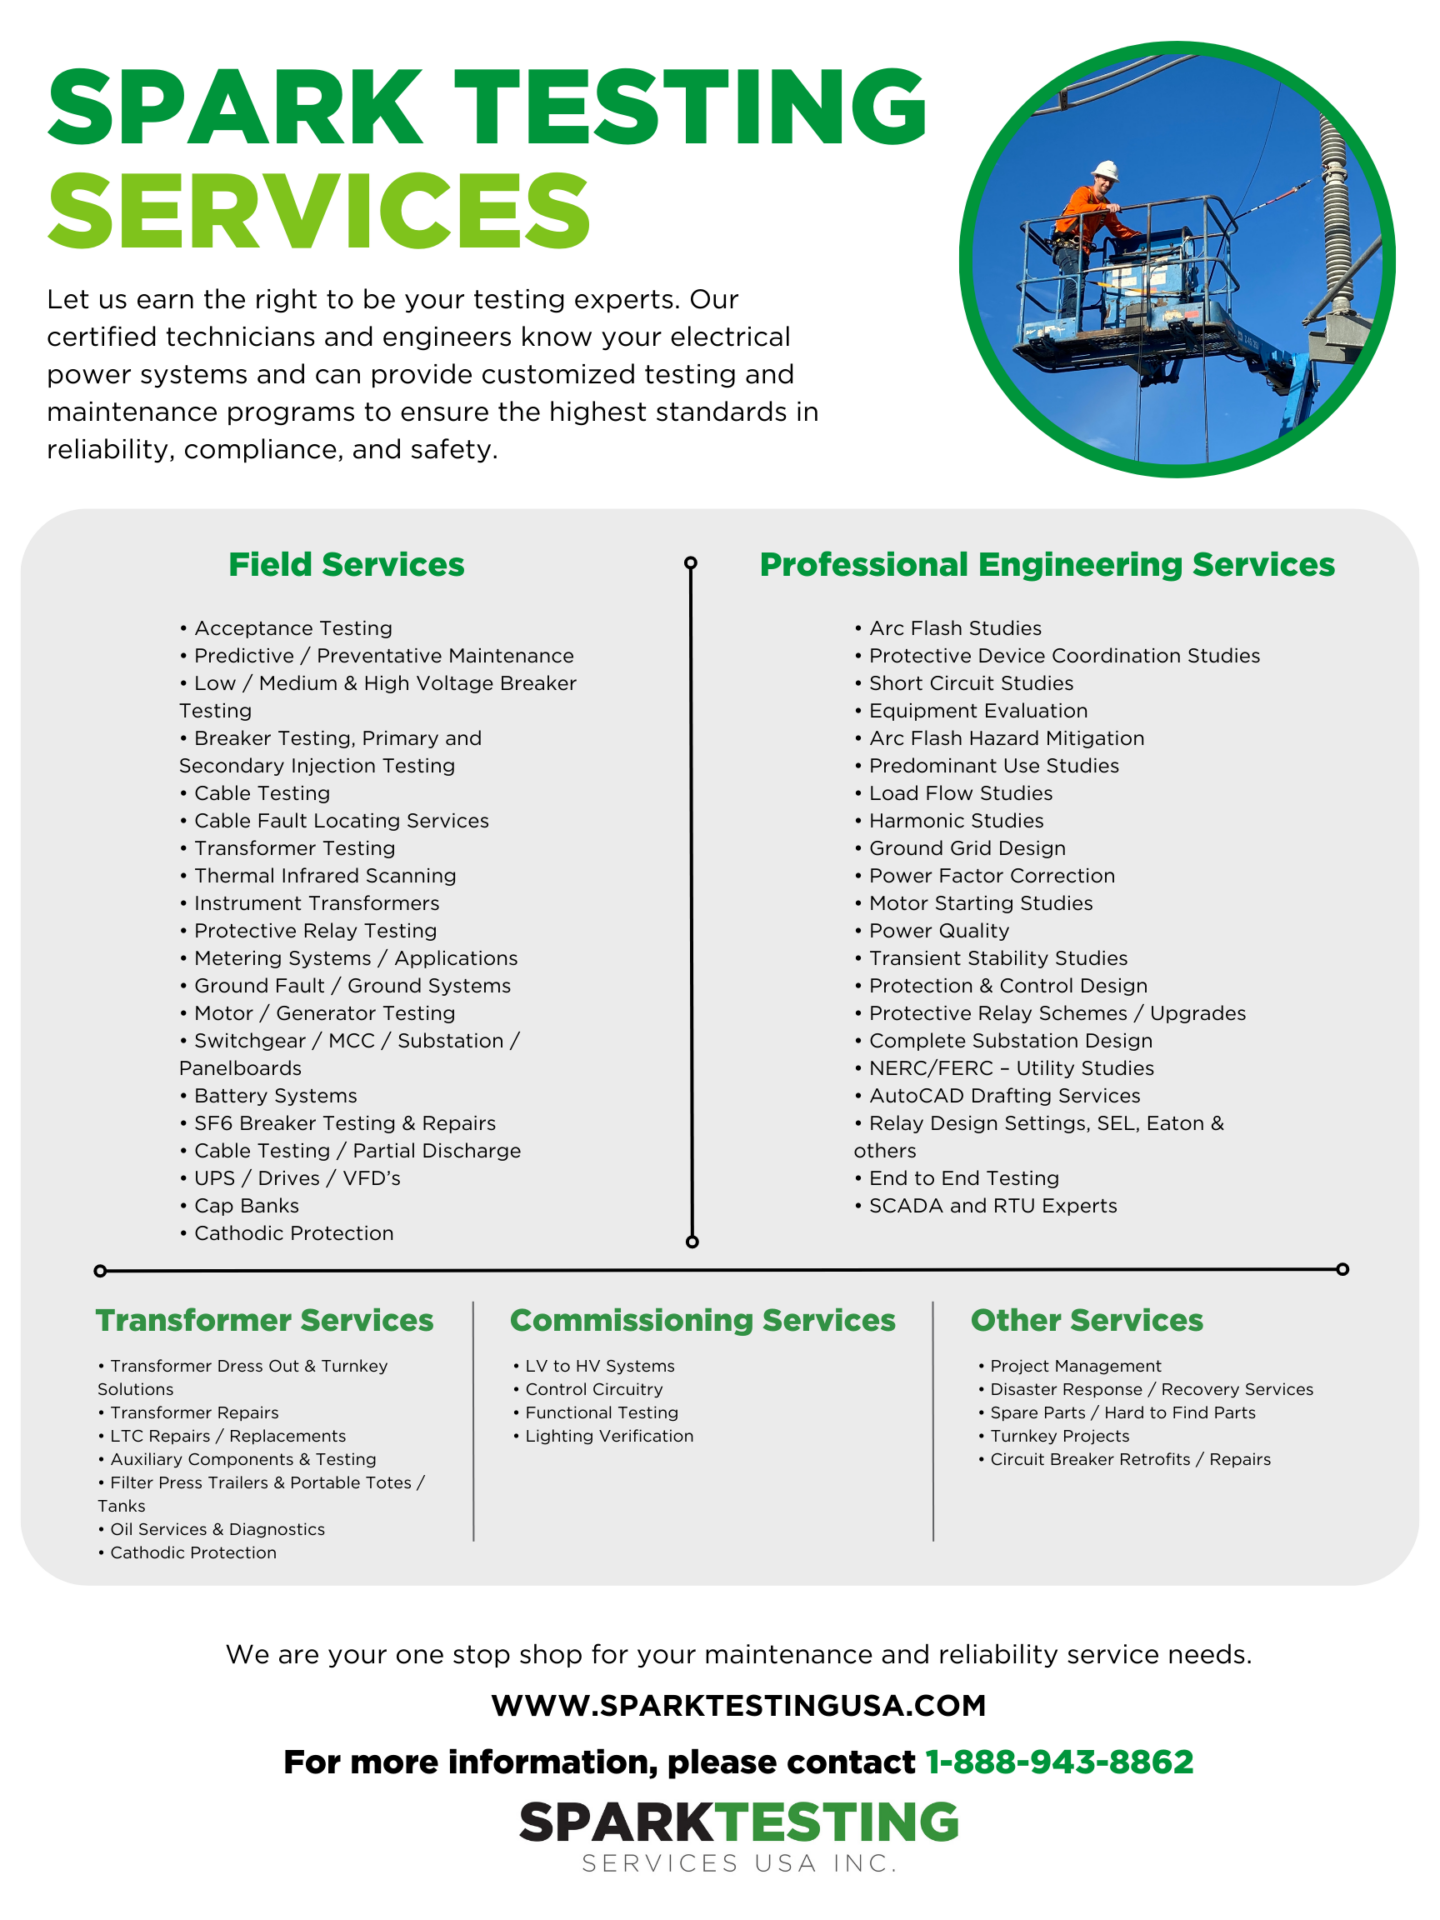 Spark Testing Services USA png